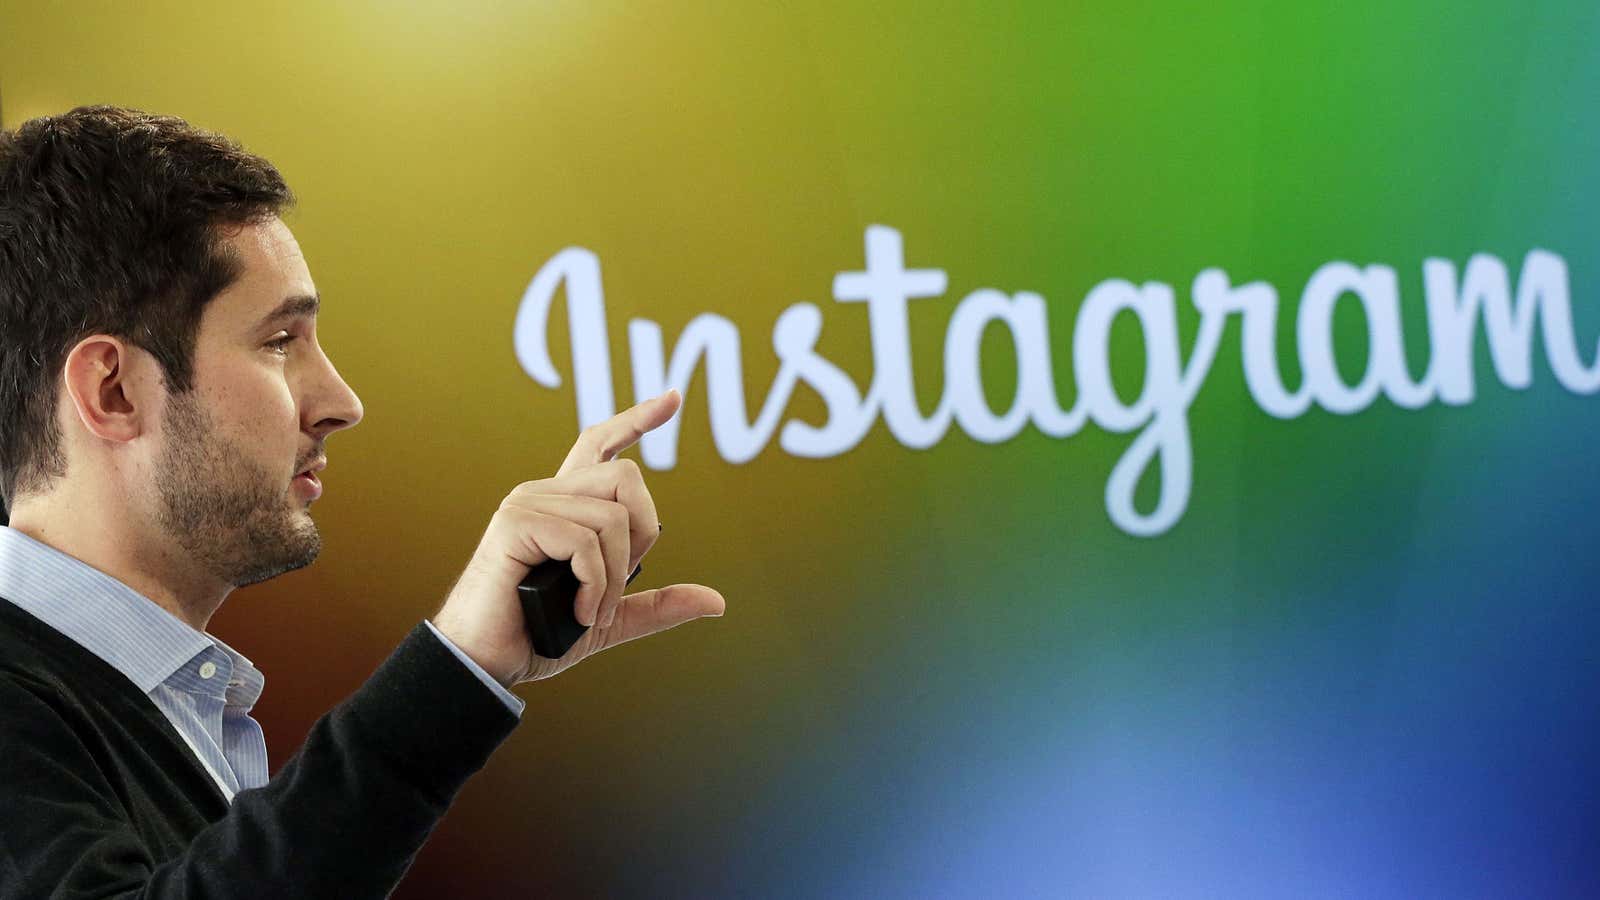 Instagram co-founder Kevin Systrom learned how to decide.